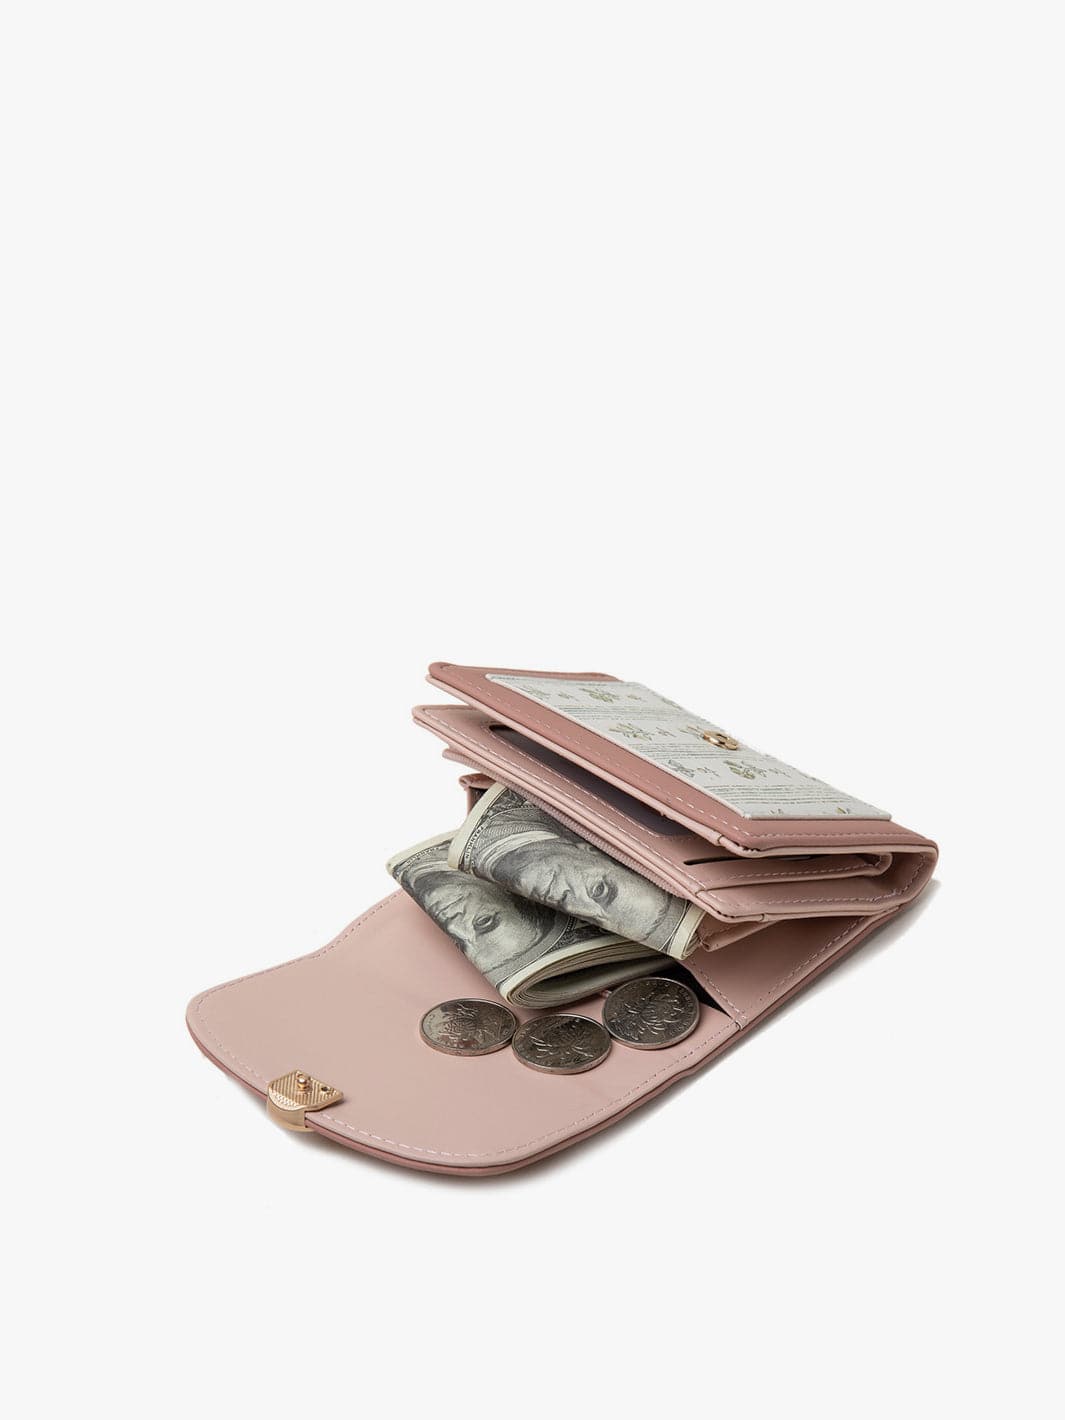 Woman's RFID Blocking French Wallet